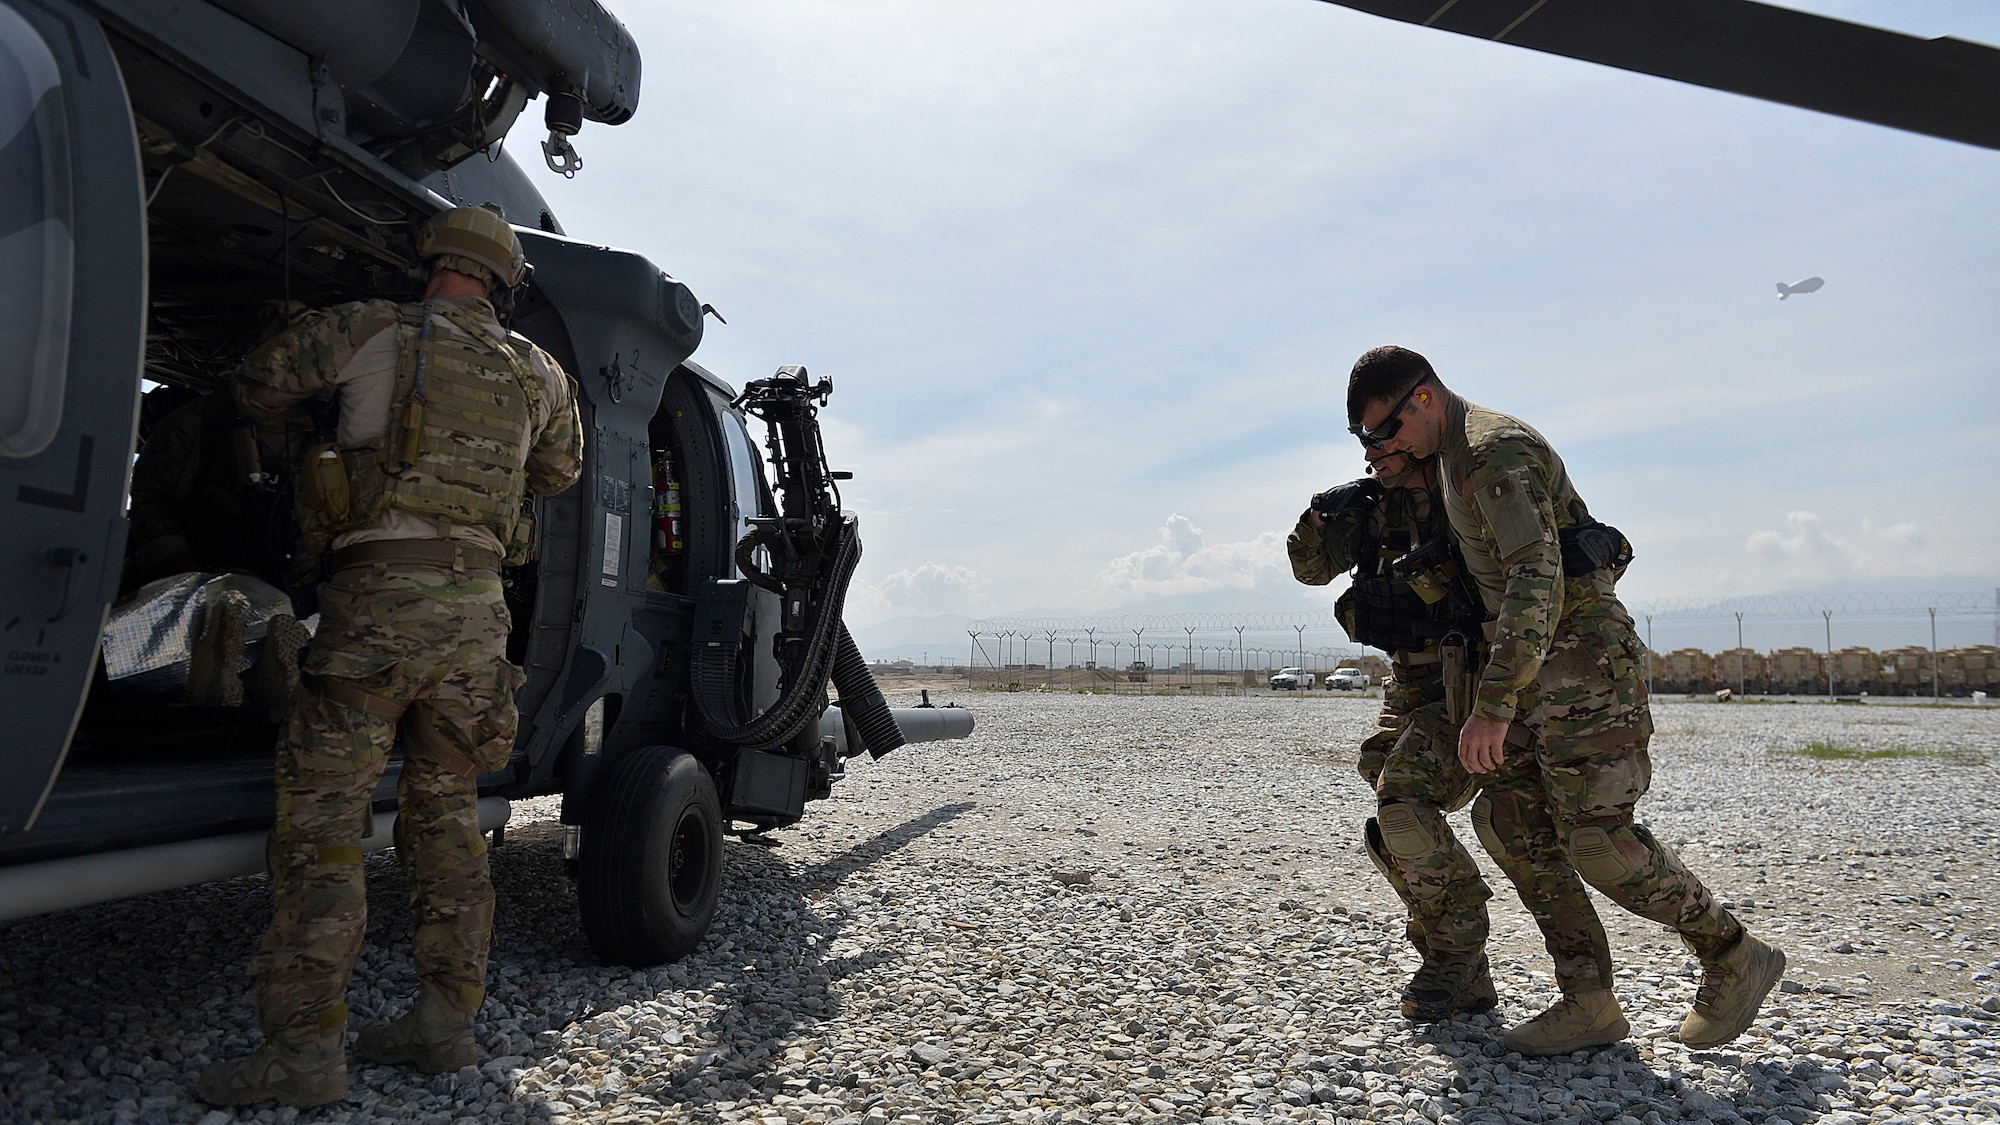 Air Force Pararescuemen from the 83rd Expeditionary Rescue Squadron, 455 Air Expeditionary Wing, Bagram Airfield, Afghanistan, help a simulated patient to a HH-60G Pave Hawk helicopter during a training exercise May 5, 2014. The scenario simulated a vehicle striking an Improvised Explosive Device. During the training, rescue crews flew on HH-60G Pave Hawks to the simulated point of injury, provided security, treated patients, prepared them for travel, and safely departed the area.  PJ’s perform life-saving missions and provide emergency medical capabilities in humanitarian and combat operations. (U.S. Air Force photo by Staff Sgt. Evelyn Chavez/Released) 